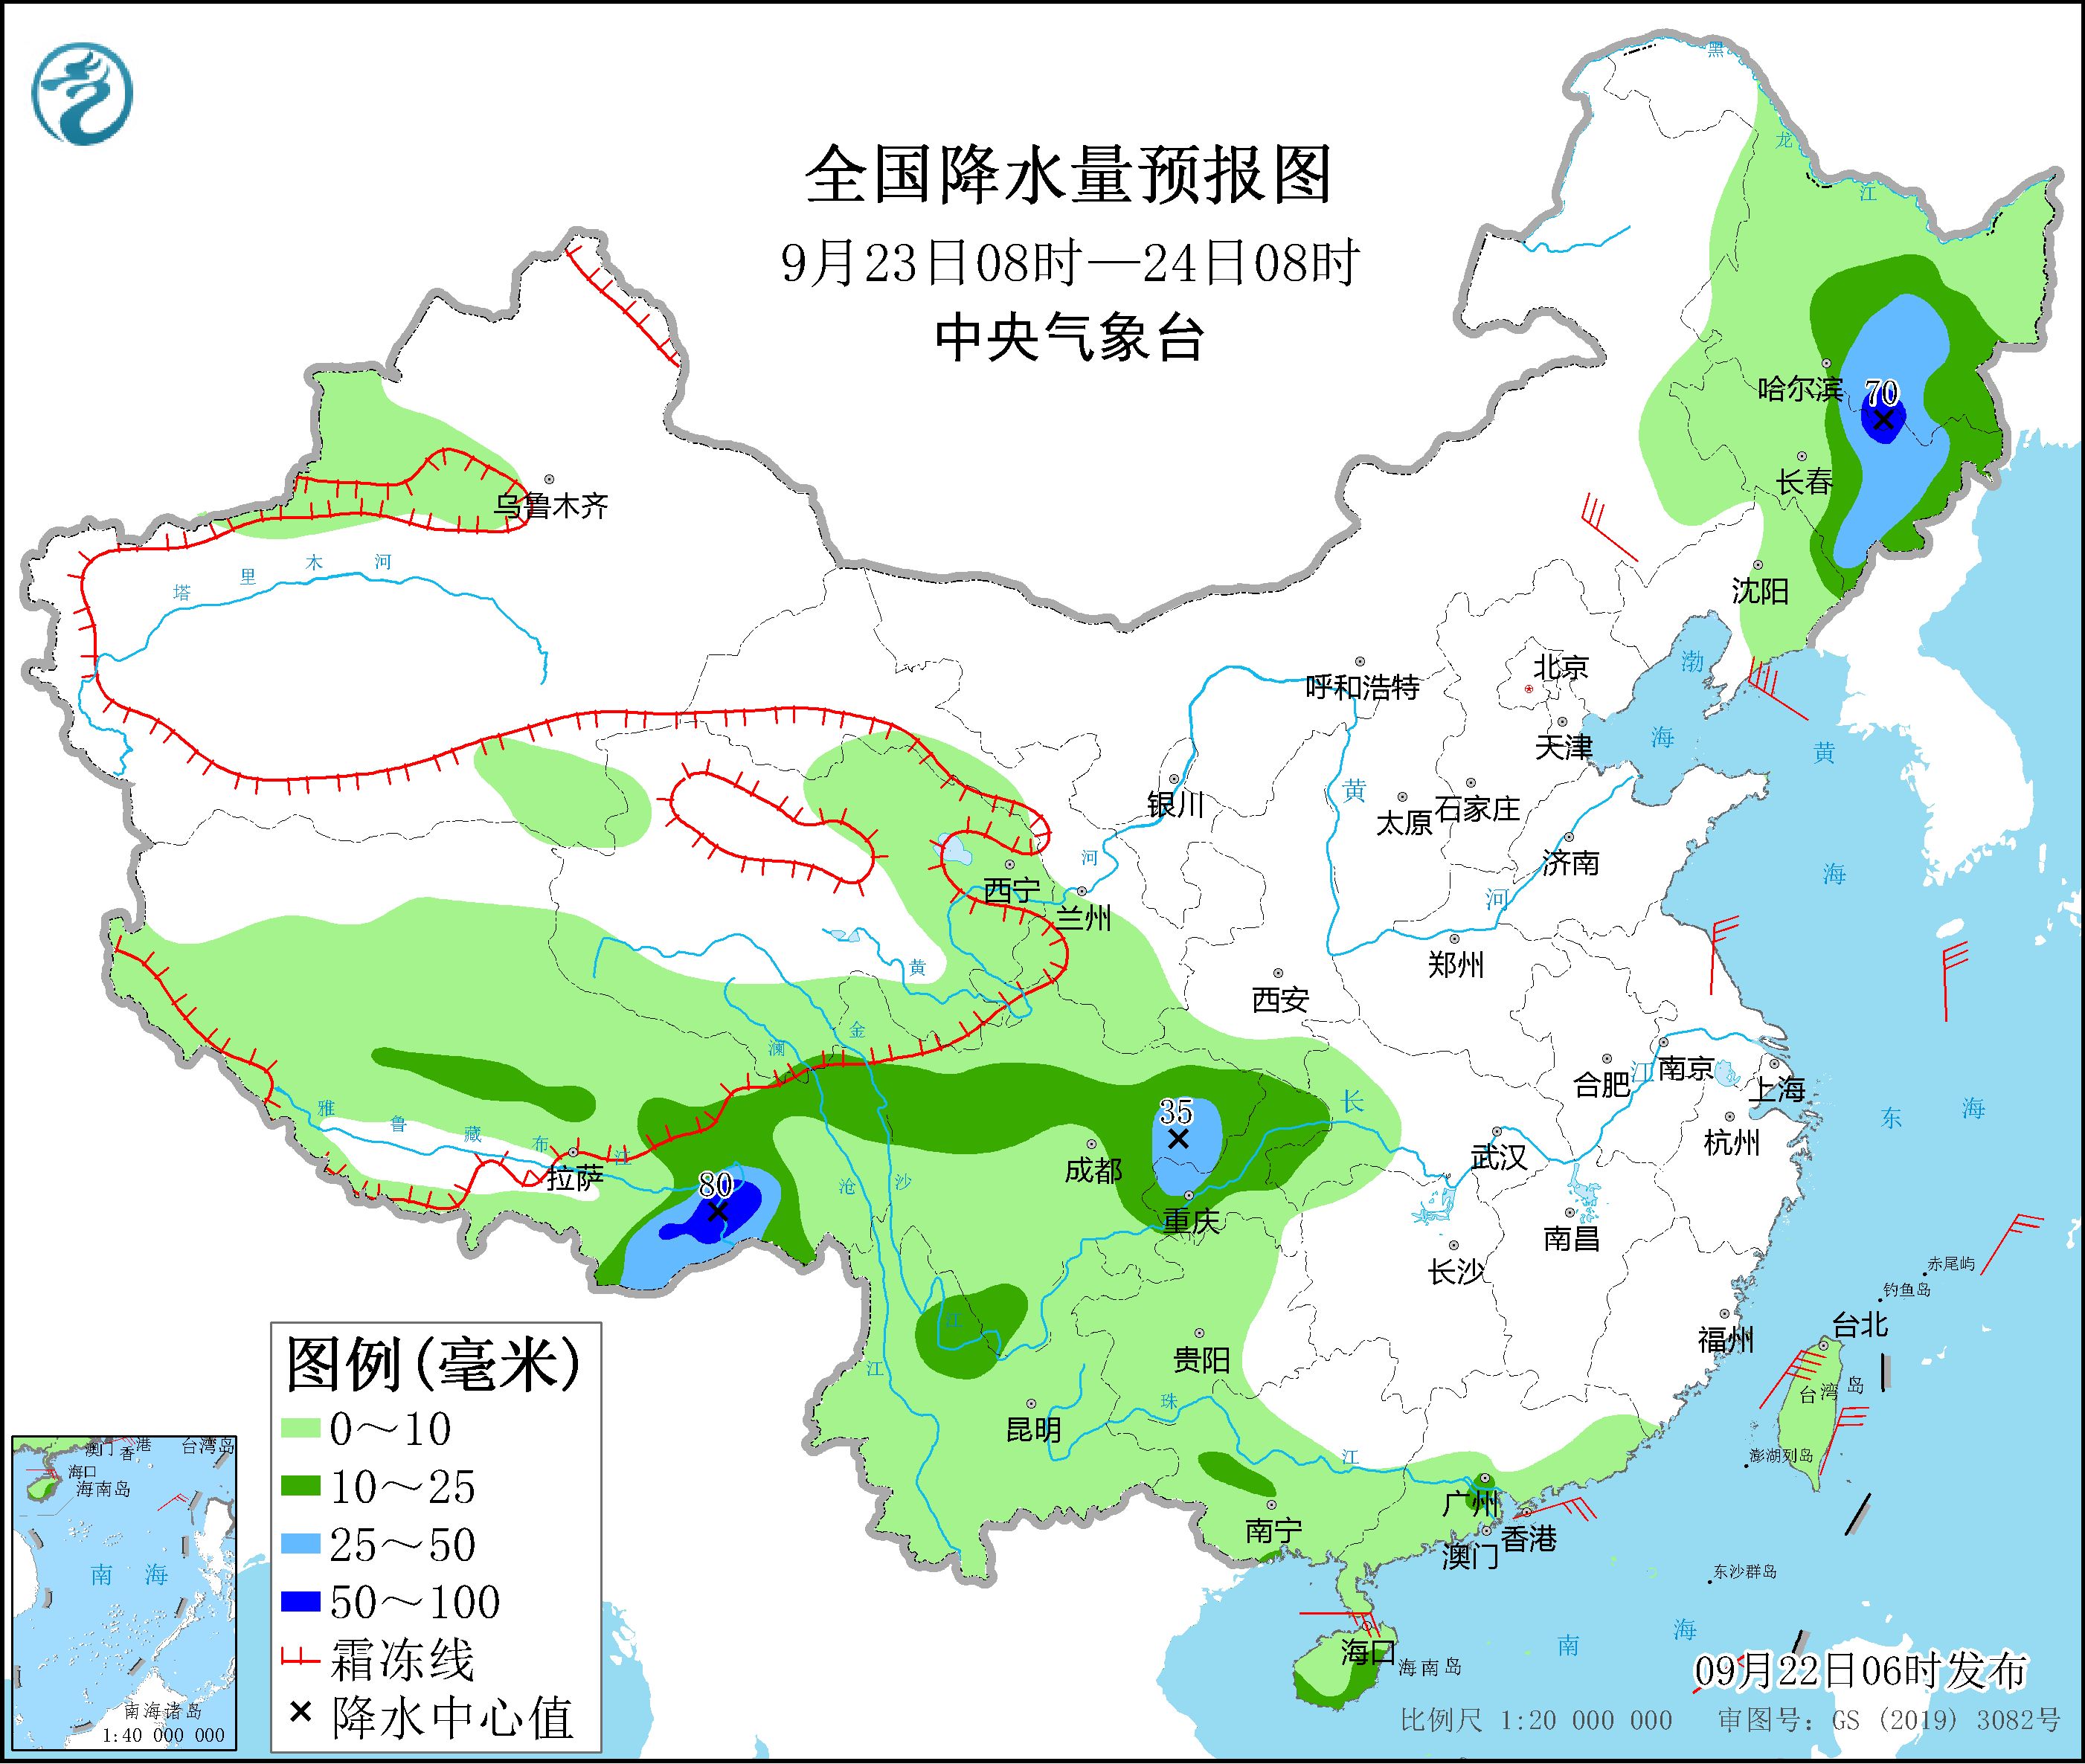 Heavy rainfall in southwest China and cold air affect northern China